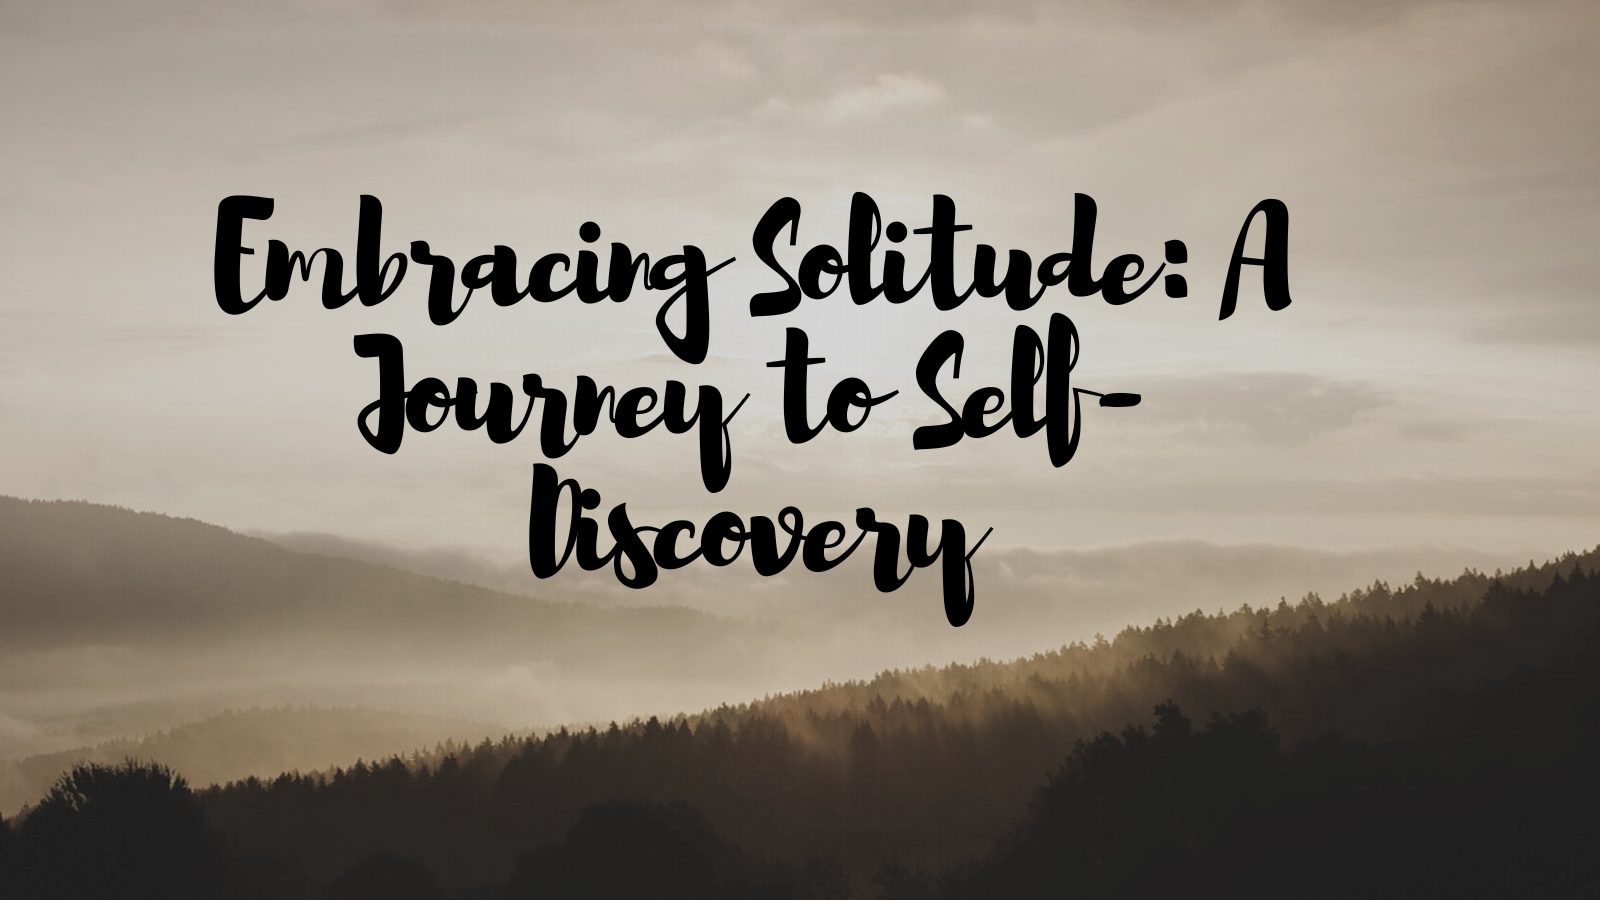 Embracing Solitude: A Journey to Self-Discovery